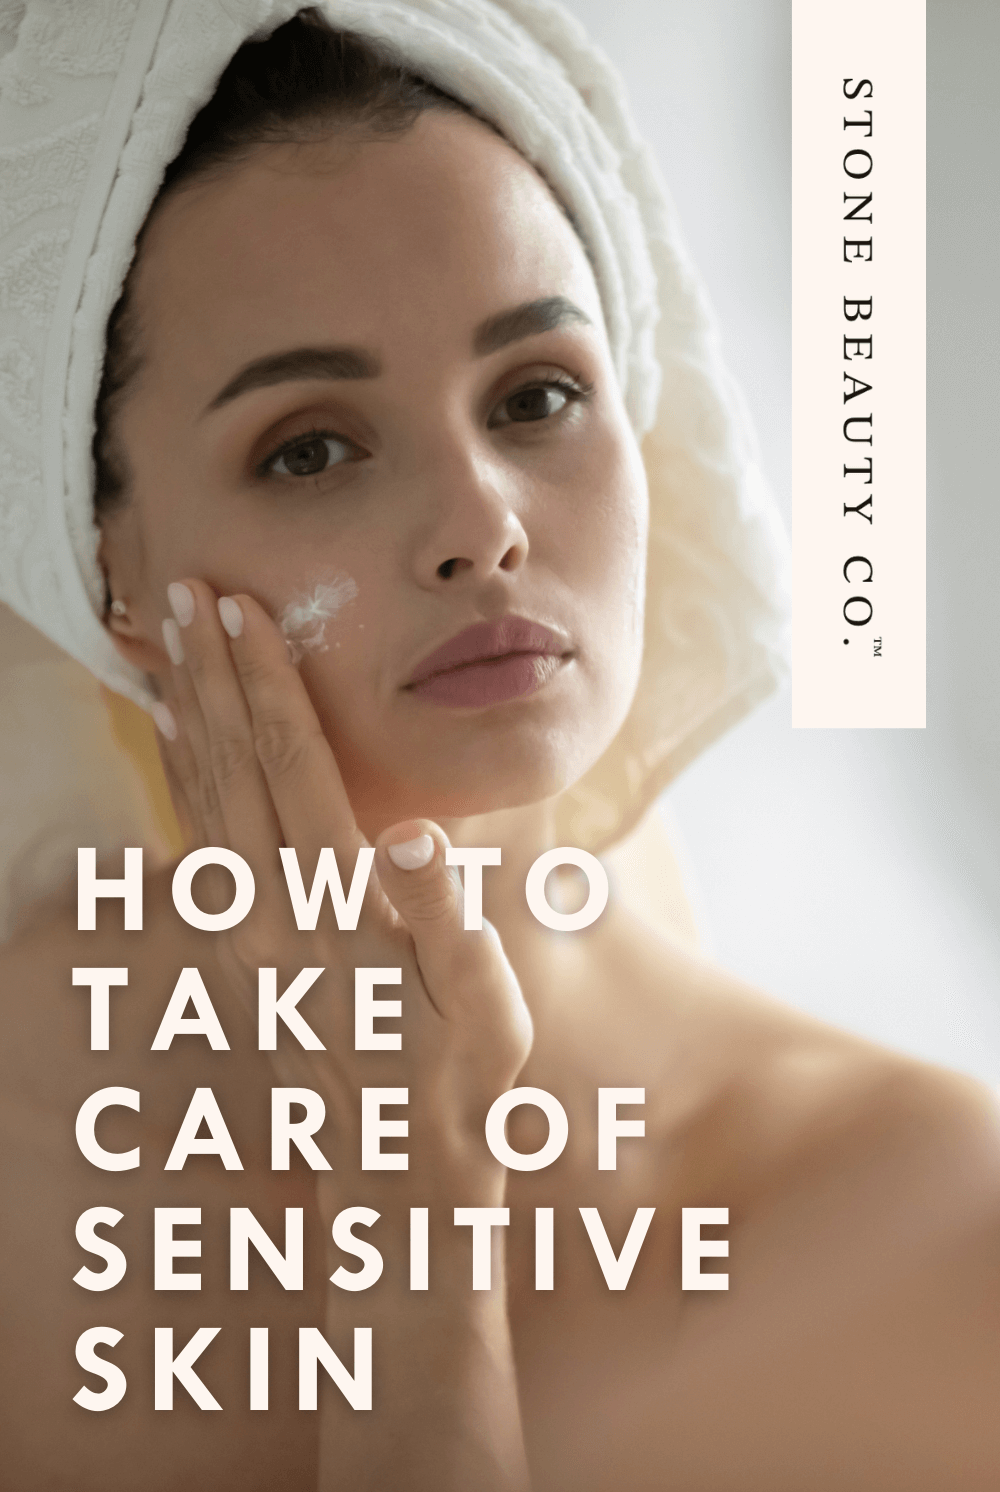 Treatments and Tips for Caring for Sensitive Skin